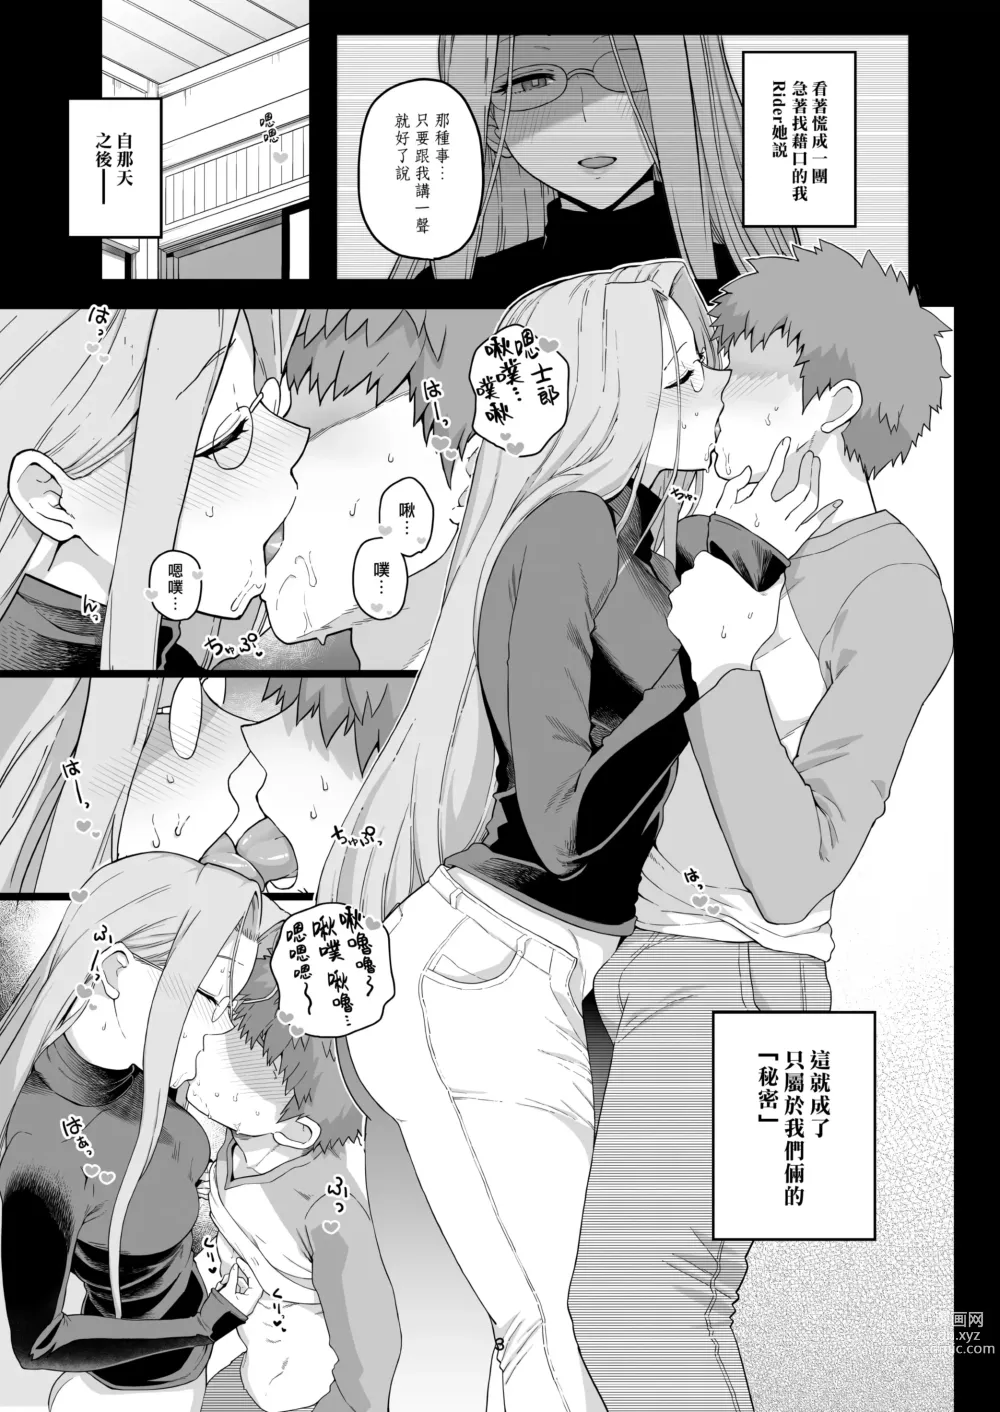 Page 6 of doujinshi Rider小姐的偷吃 (decensored)